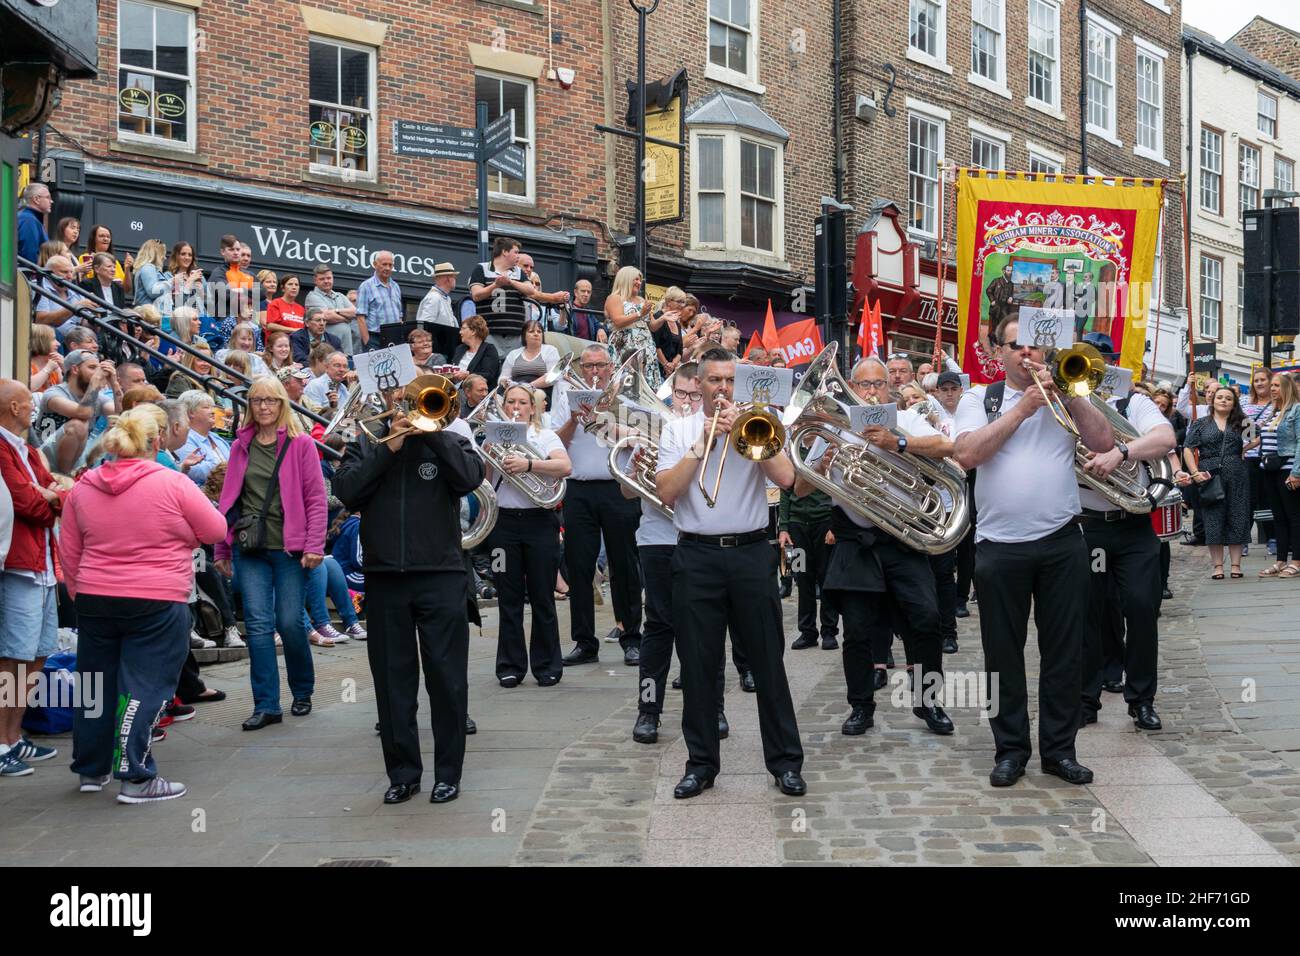 Durham Miner's Gala aka Big Meeting. Held annually, large crowds gather to celebrate Miners history with marches and speeches by labour politicians. Stock Photo